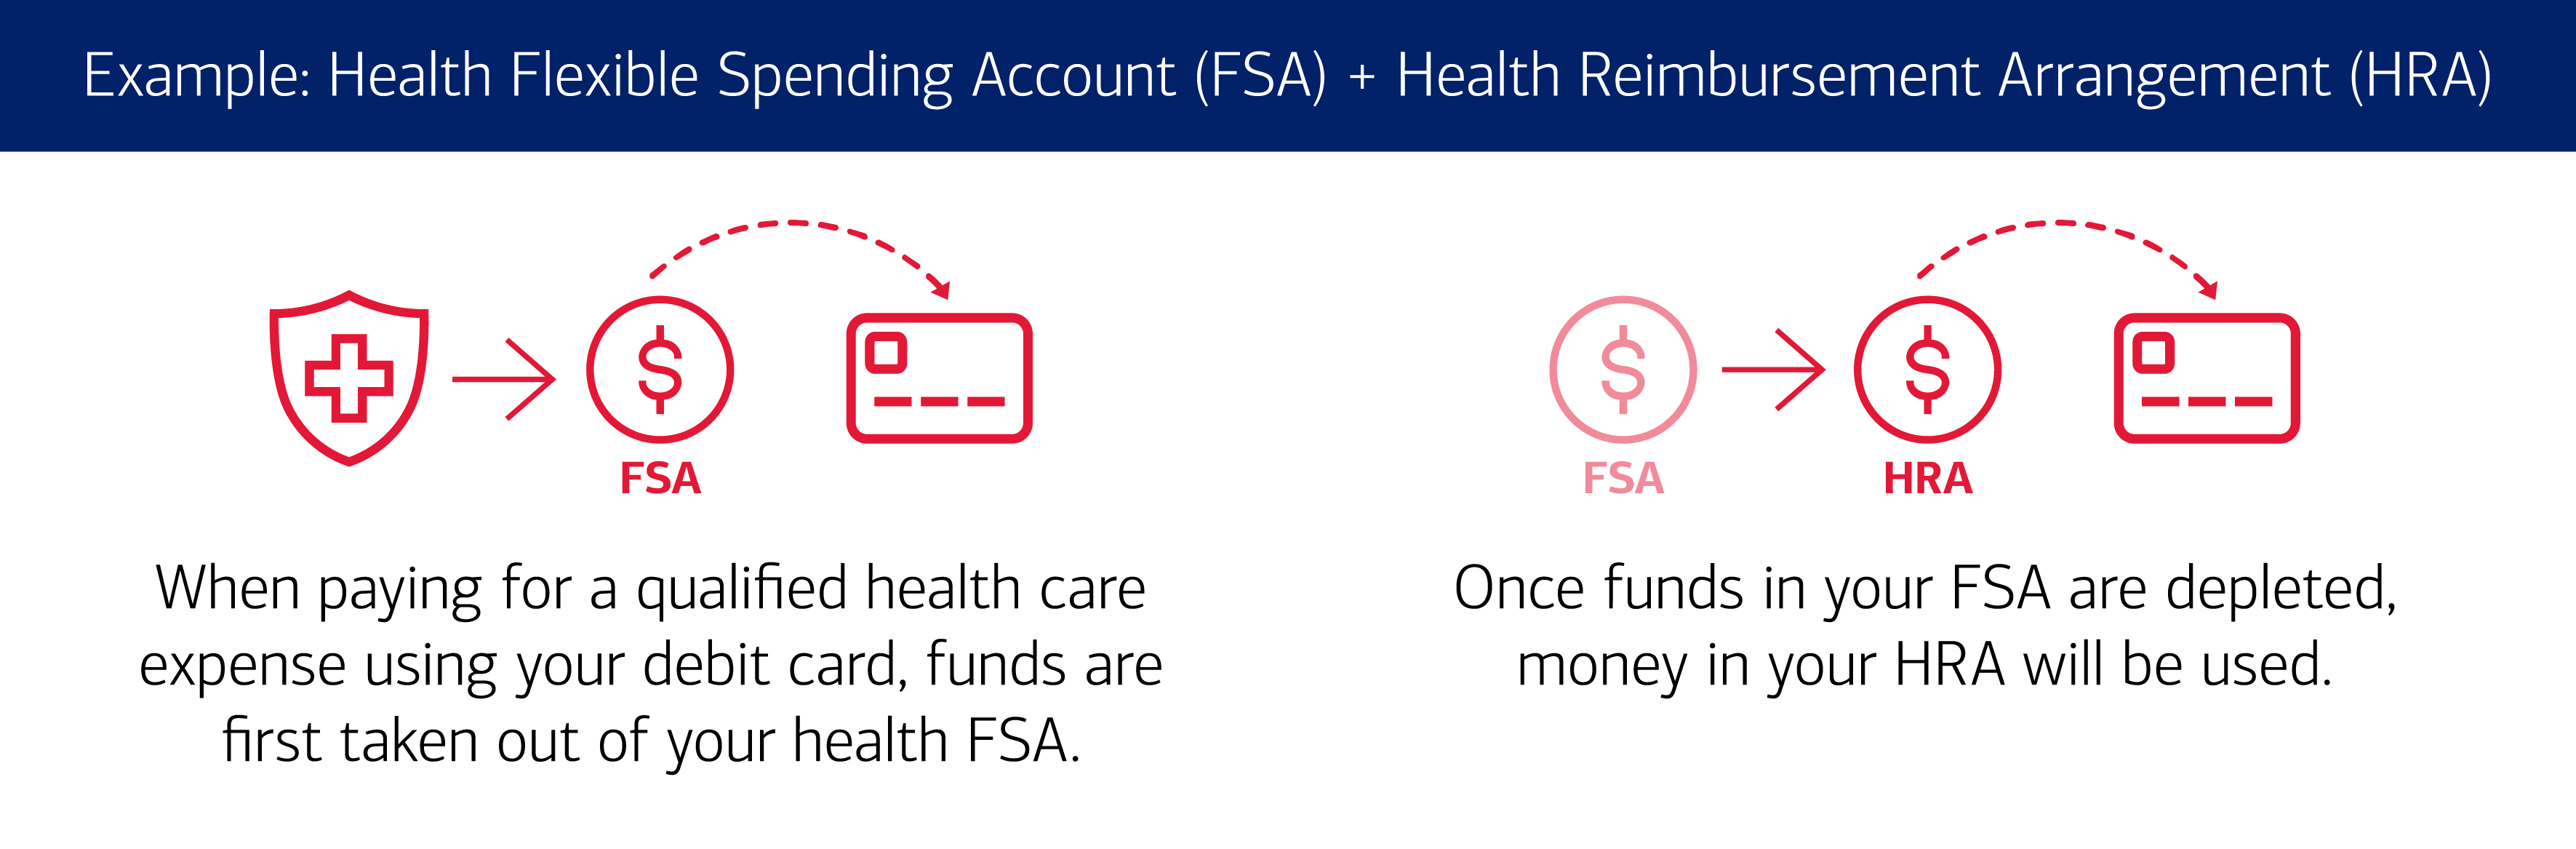 Graphic illustrates that when you have a Flexible Spending Account (FSA) and a Health Reimbursement Arrangement (HRA) and are paying for qualified health care expenses with your debit card, funds are first taken out of your health FSA. Once funds in your FSA are depleted, money in  your HRA will be used. 